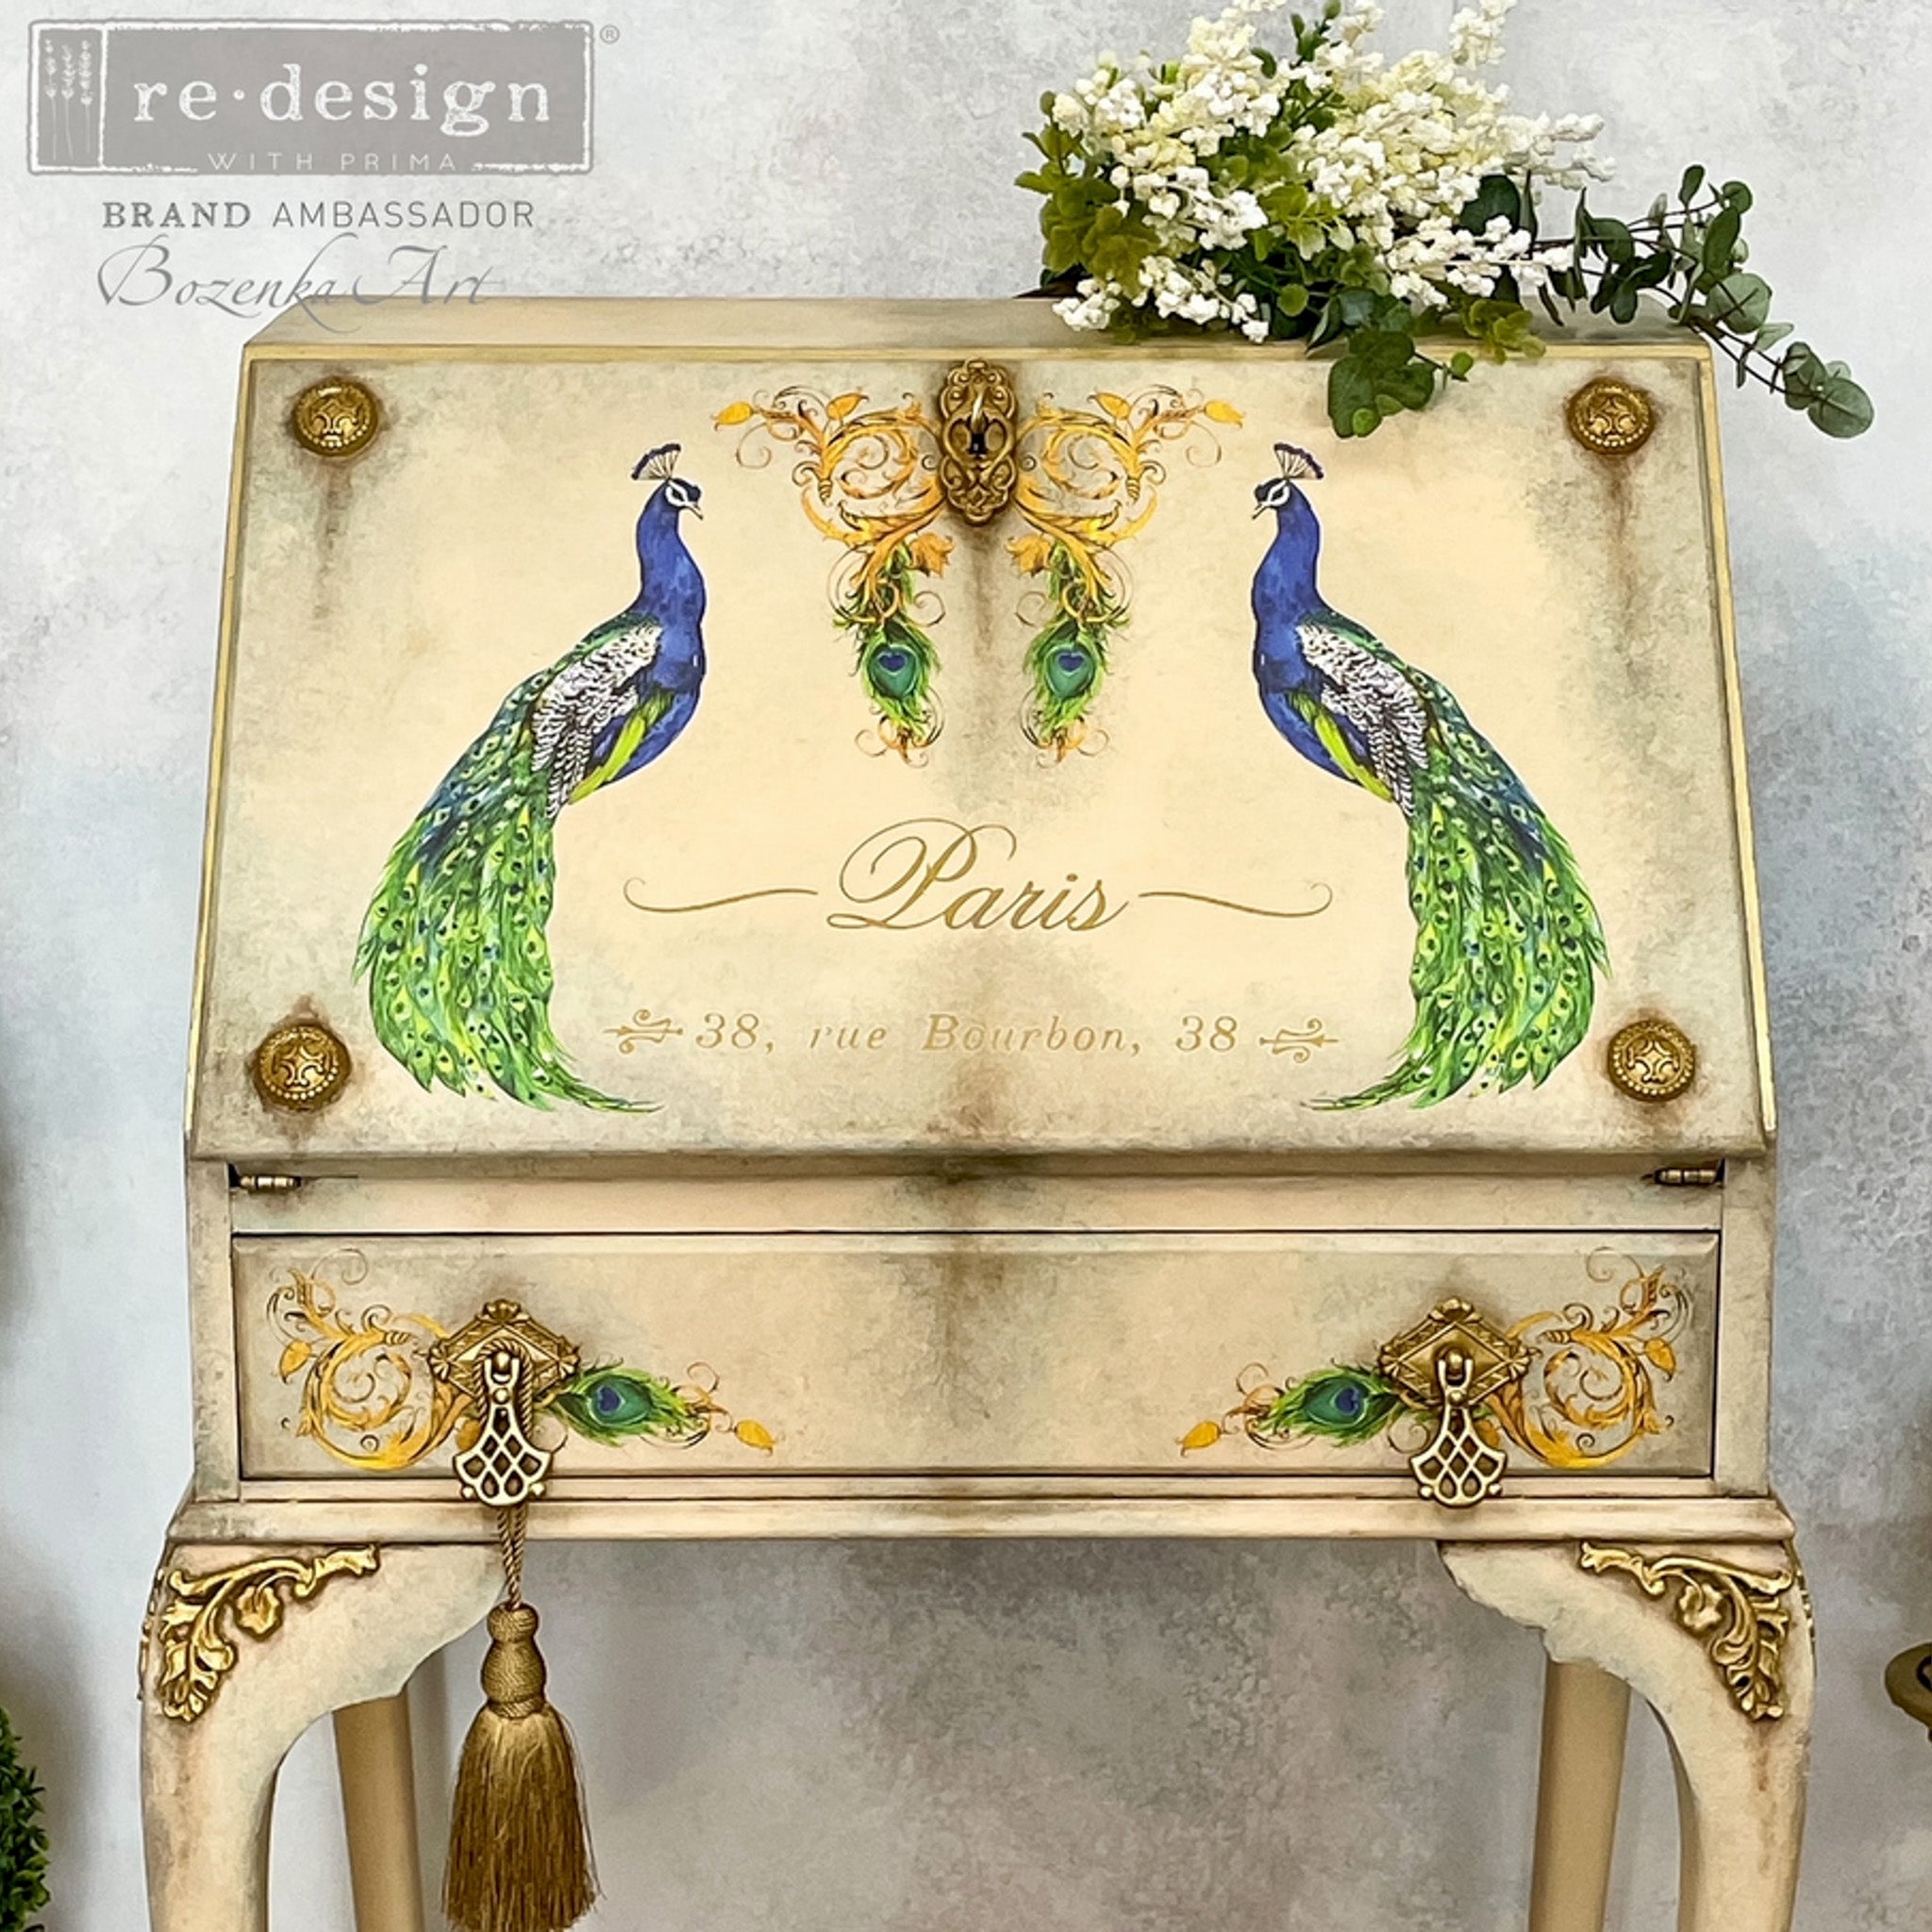 A vintage secretary's desk refurbished by Bozenka Art is painted light tan and features ReDesign with Prima's Peacock Paradise small transfer on it.